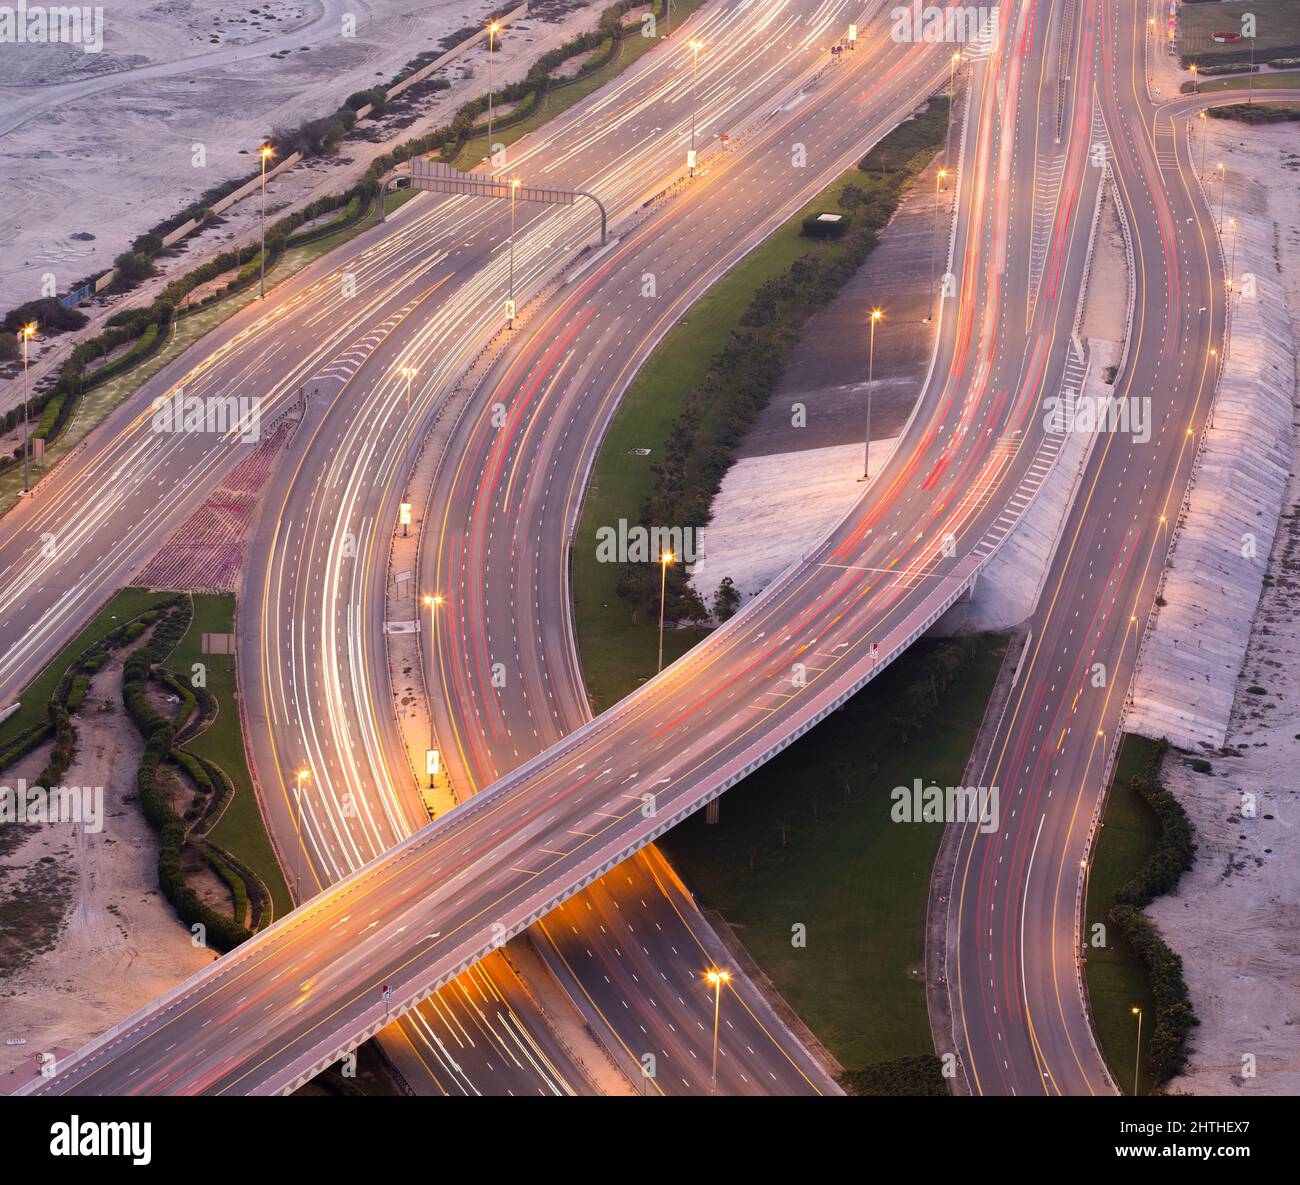 Aerial view of a multi level road crossing during evening hour with trails of traffic lights. Stock Photo